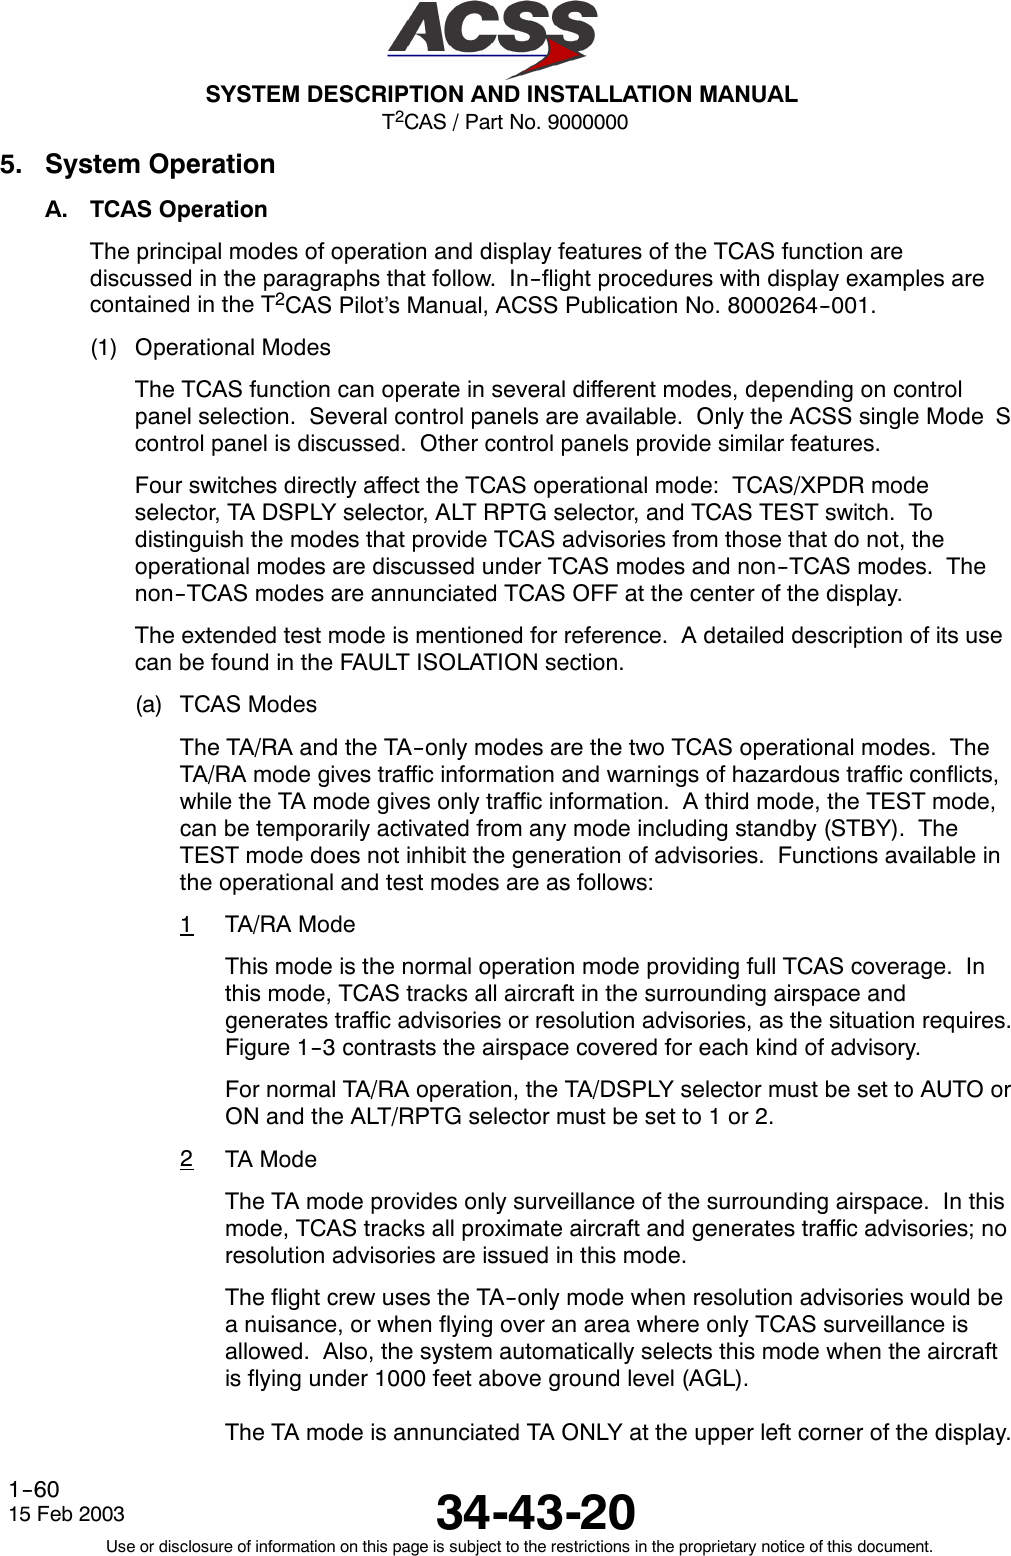 T2CAS / Part No. 9000000SYSTEM DESCRIPTION AND INSTALLATION MANUAL34-43-2015 Feb 2003Use or disclosure of information on this page is subject to the restrictions in the proprietary notice of this document.1--605. System OperationA. TCAS OperationThe principal modes of operation and display features of the TCAS function arediscussed in the paragraphs that follow. In--flight procedures with display examples arecontained in the T2CAS Pilot’s Manual, ACSS Publication No. 8000264--001.(1) Operational ModesThe TCAS function can operate in several different modes, depending on controlpanel selection. Several control panels are available. Only the ACSS single Mode Scontrol panel is discussed. Other control panels provide similar features.Four switches directly affect the TCAS operational mode: TCAS/XPDR modeselector, TA DSPLY selector, ALT RPTG selector, and TCAS TEST switch. Todistinguish the modes that provide TCAS advisories from those that do not, theoperational modes are discussed under TCAS modes and non--TCAS modes. Thenon--TCAS modes are annunciated TCAS OFF at the center of the display.The extended test mode is mentioned for reference. A detailed description of its usecan be found in the FAULT ISOLATION section.(a) TCAS ModesThe TA/RA and the TA--only modes are the two TCAS operational modes. TheTA/RA mode gives traffic information and warnings of hazardous traffic conflicts,while the TA mode gives only traffic information. A third mode, the TEST mode,can be temporarily activated from any mode including standby (STBY). TheTEST mode does not inhibit the generation of advisories. Functions available inthe operational and test modes are as follows:1TA/RA ModeThis mode is the normal operation mode providing full TCAS coverage. Inthis mode, TCAS tracks all aircraft in the surrounding airspace andgenerates traffic advisories or resolution advisories, as the situation requires.Figure 1--3 contrasts the airspace covered for each kind of advisory.For normal TA/RA operation, the TA/DSPLY selector must be set to AUTO orON and the ALT/RPTG selector must be set to 1 or 2.2TA ModeThe TA mode provides only surveillance of the surrounding airspace. In thismode, TCAS tracks all proximate aircraft and generates traffic advisories; noresolution advisories are issued in this mode.The flight crew uses the TA--only mode when resolution advisories would bea nuisance, or when flying over an area where only TCAS surveillance isallowed. Also, the system automatically selects this mode when the aircraftis flying under 1000 feet above ground level (AGL).The TA mode is annunciated TA ONLY at the upper left corner of the display.